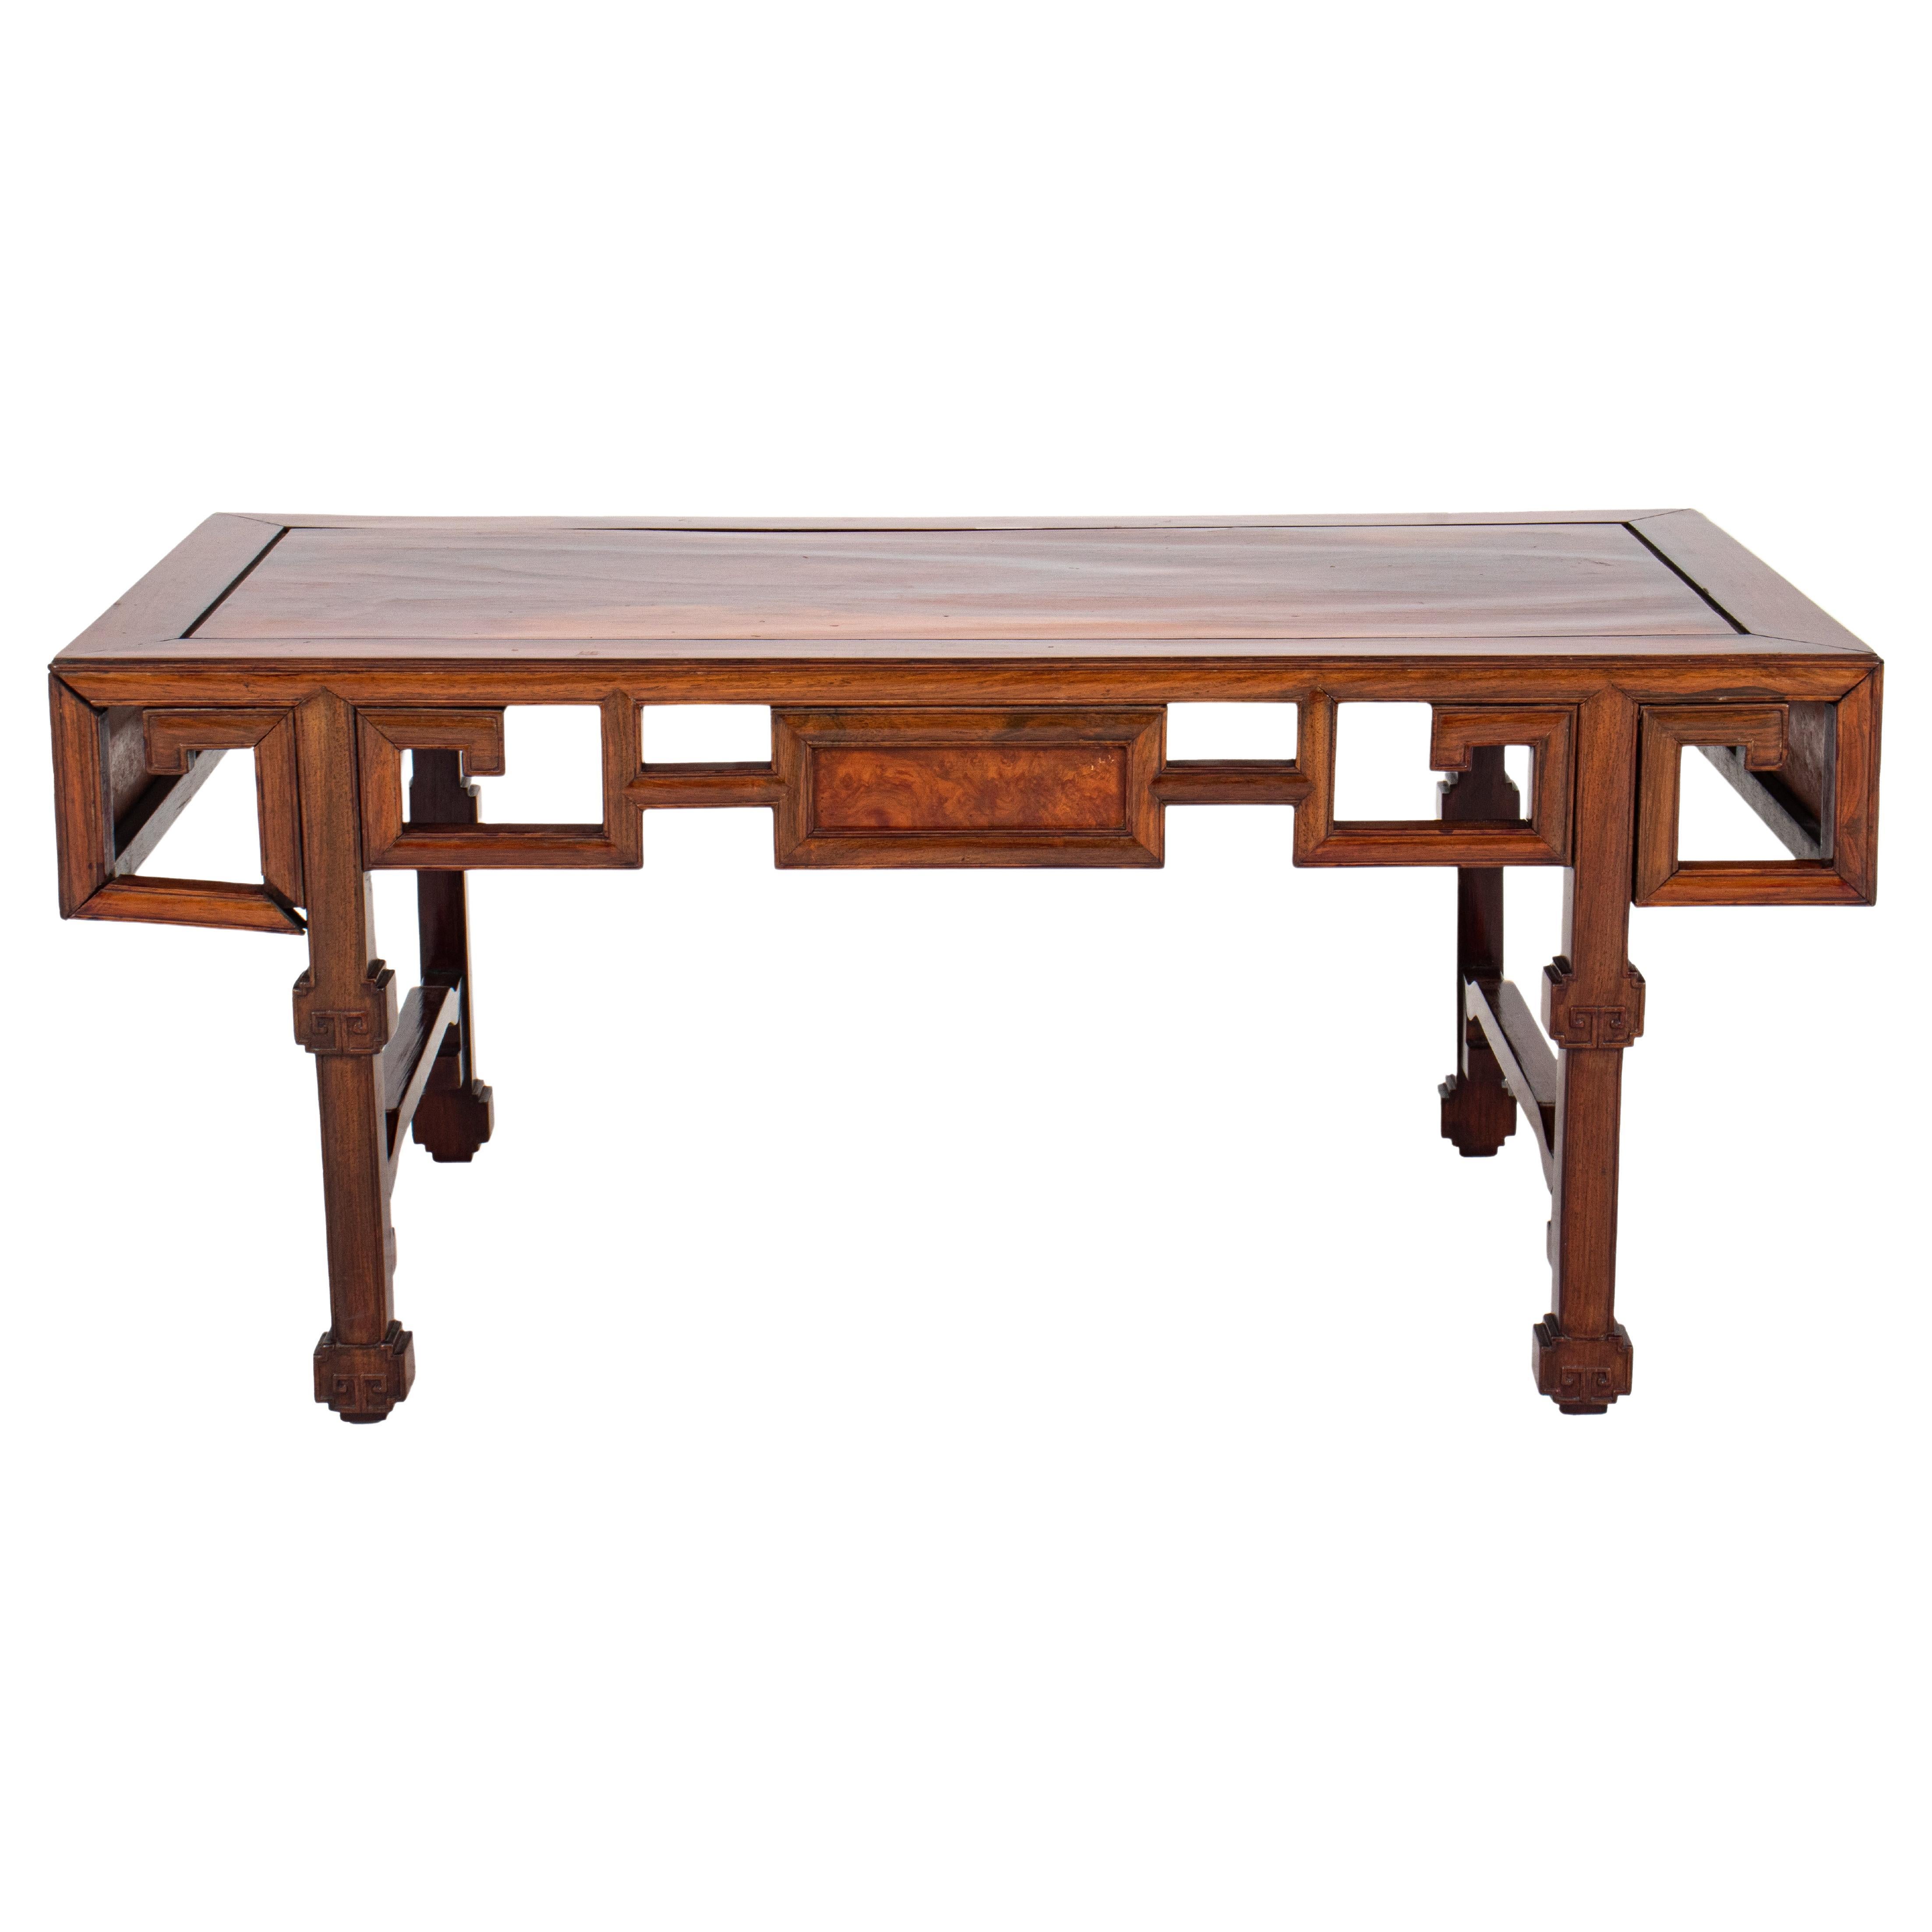 Chinese Scholar's Table